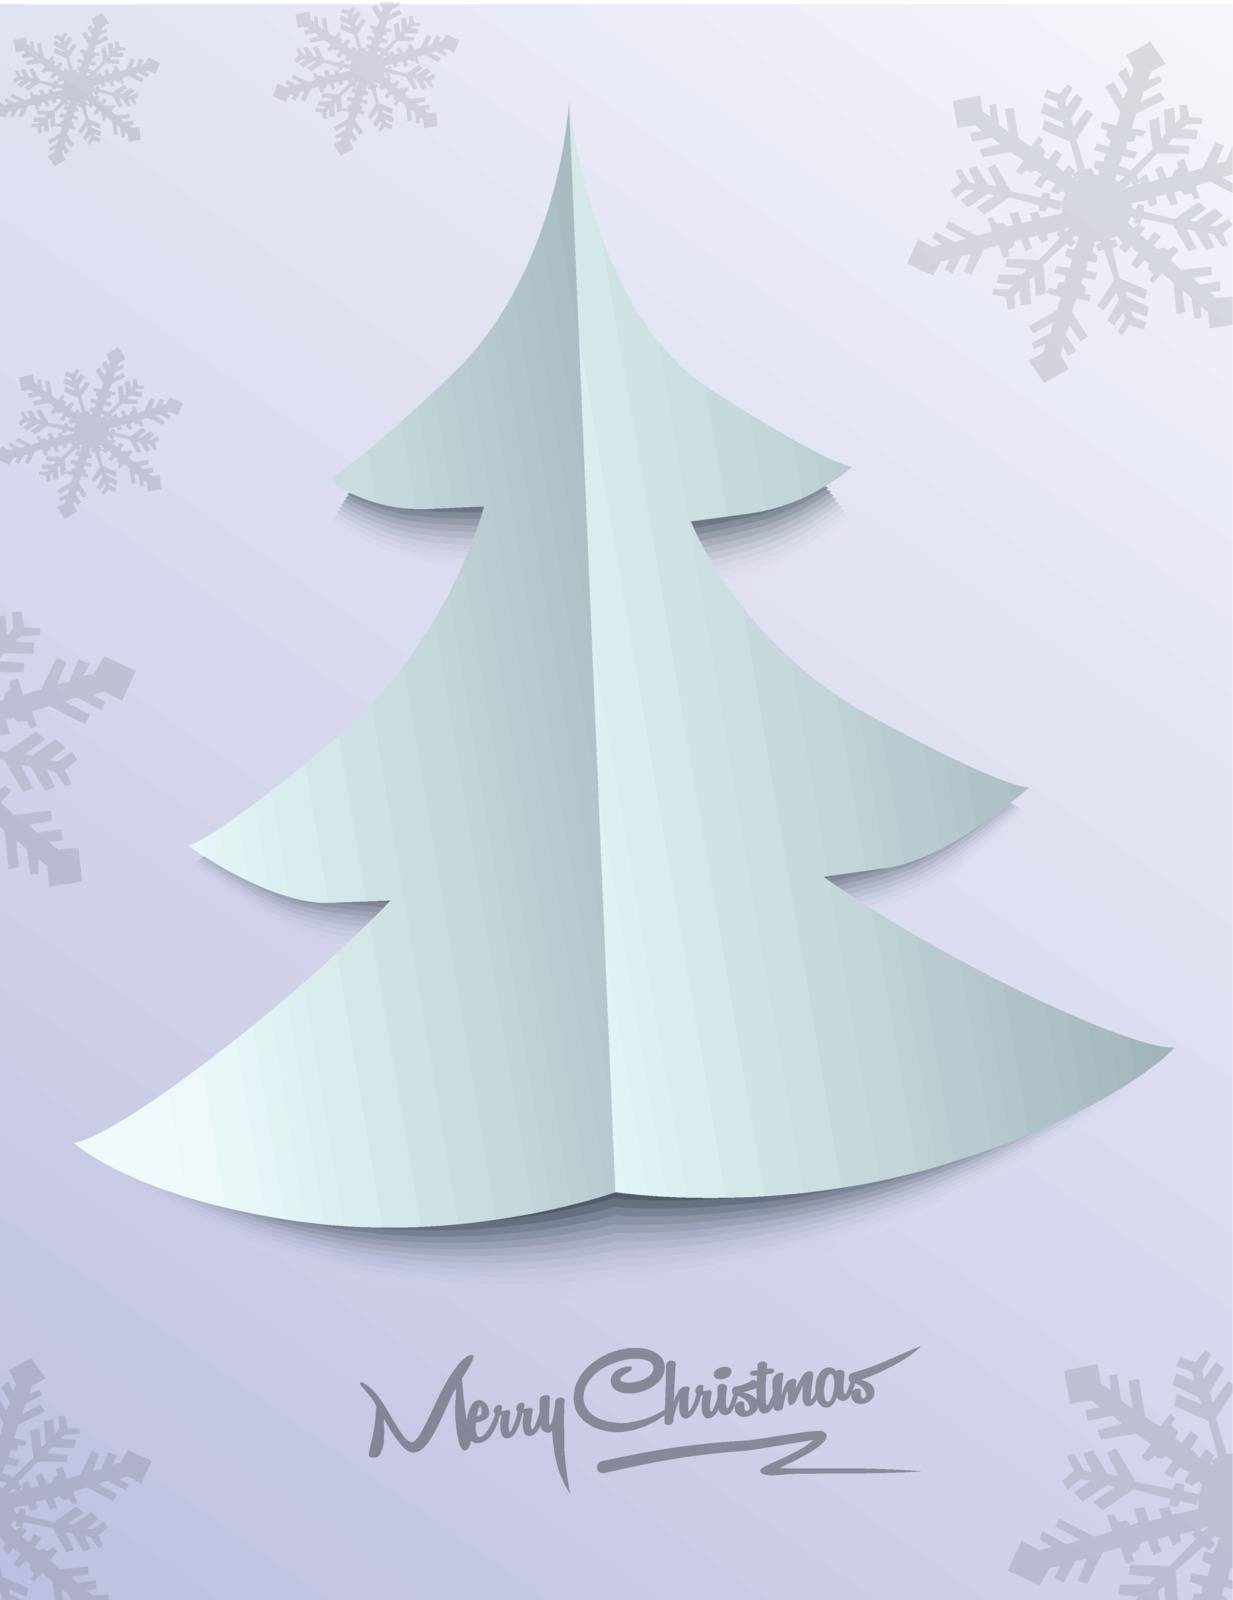 Paper Christmas tree by robin2